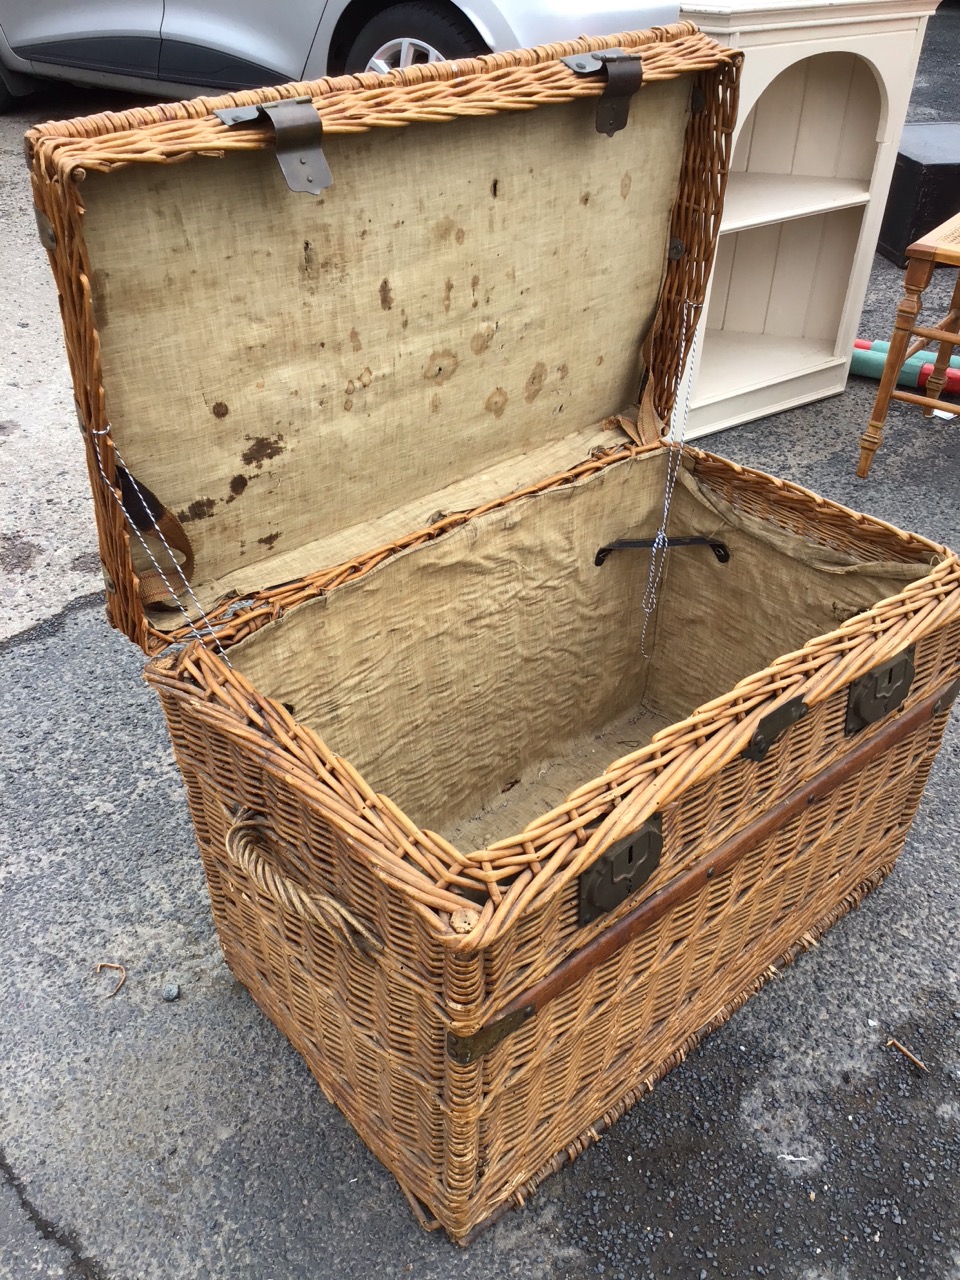 An Edwardian cane hamper or laundry basket with wood slats and brass mounts - the interior lined. ( - Image 3 of 3